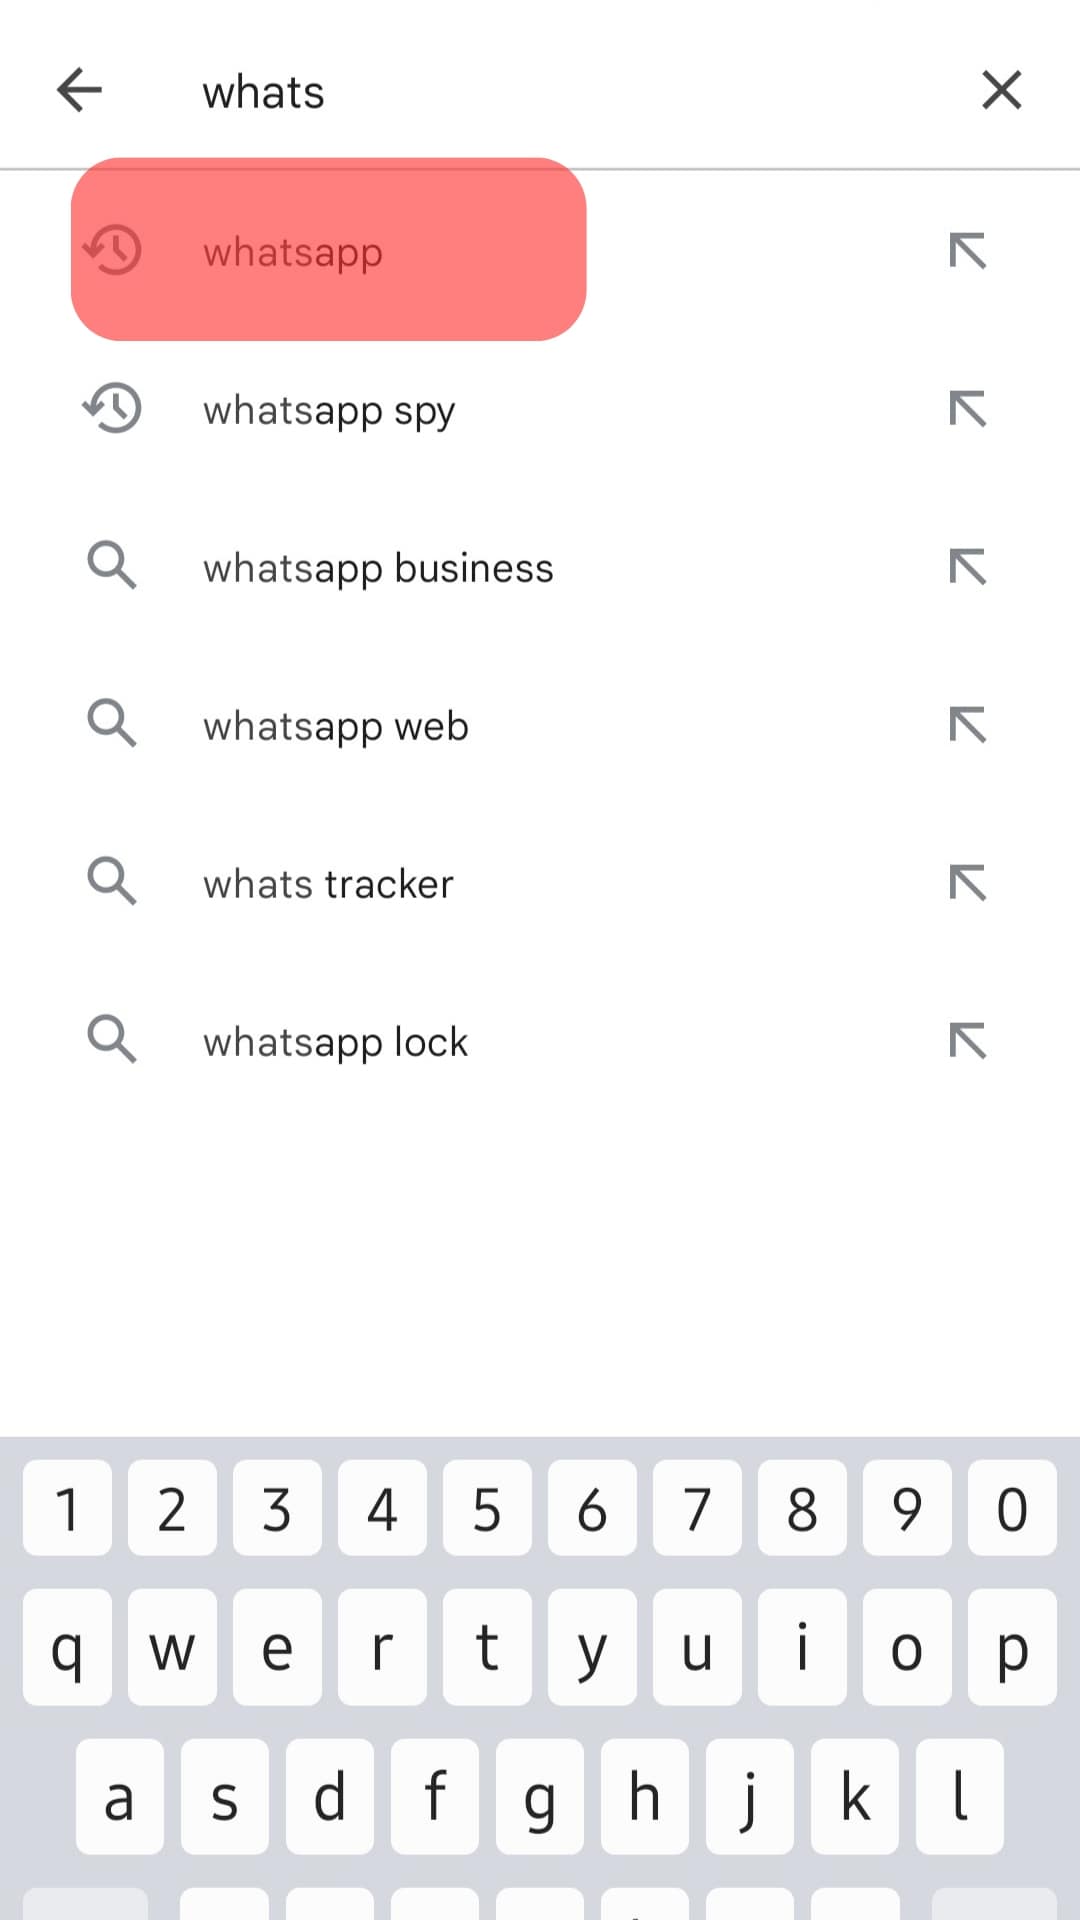 Search For Whatsapp In Playstore